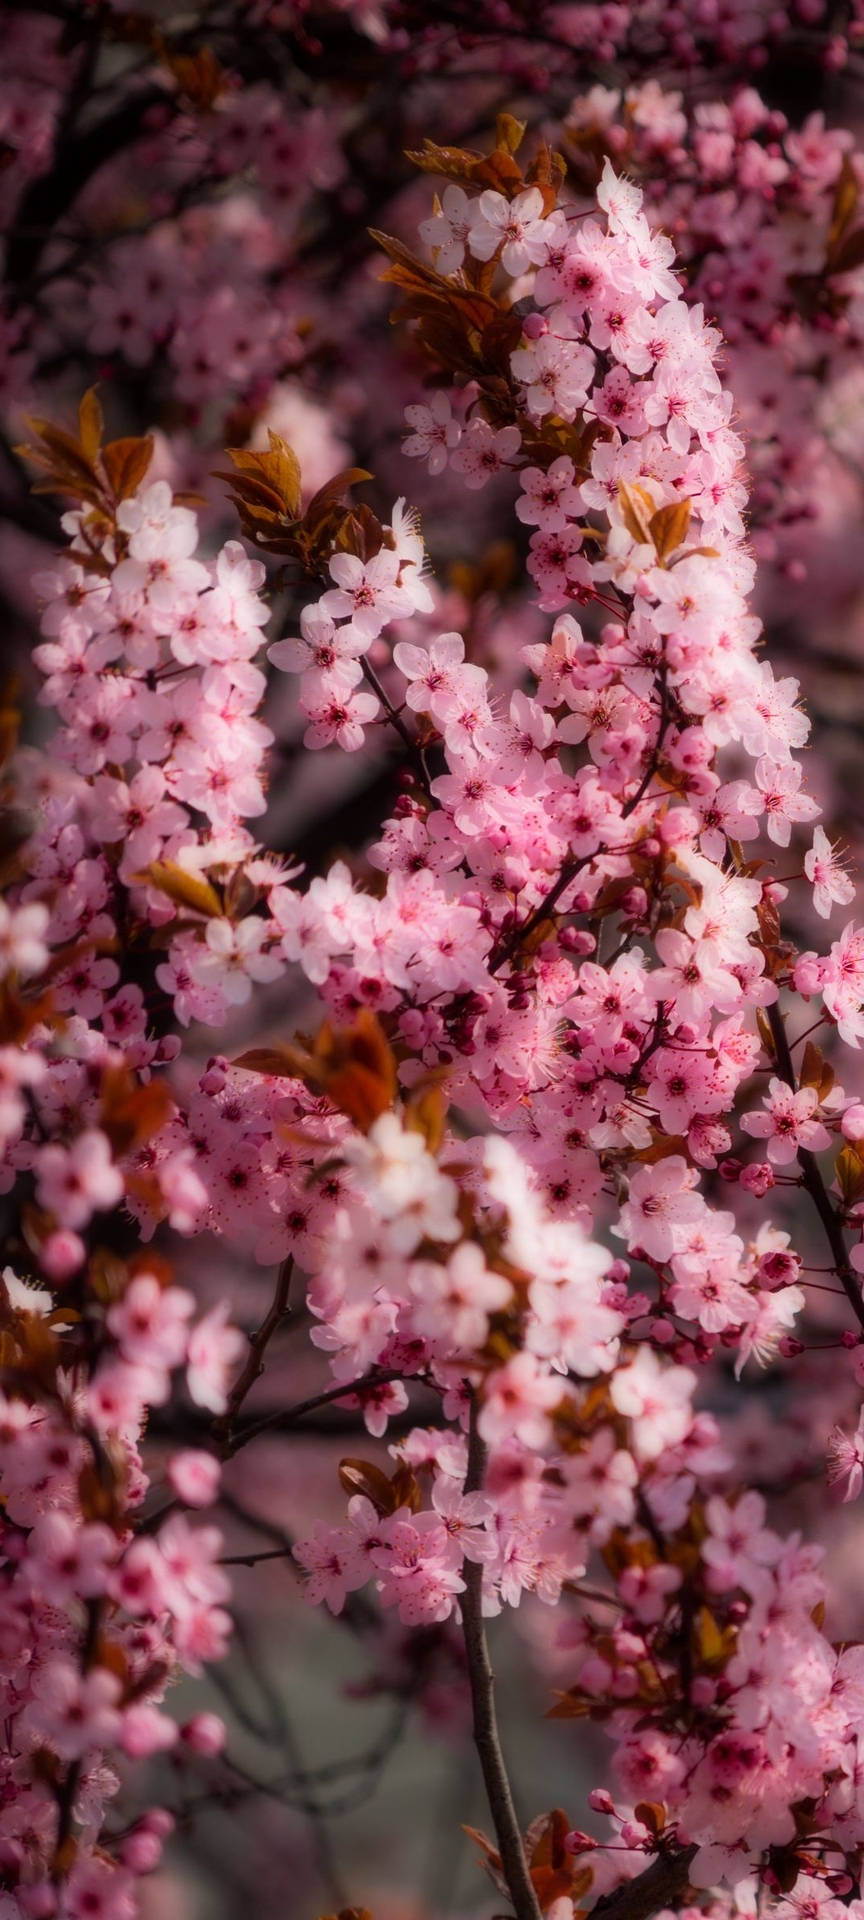 Redmi Note 10 Blooming Cherry Blossoms Wallpaper